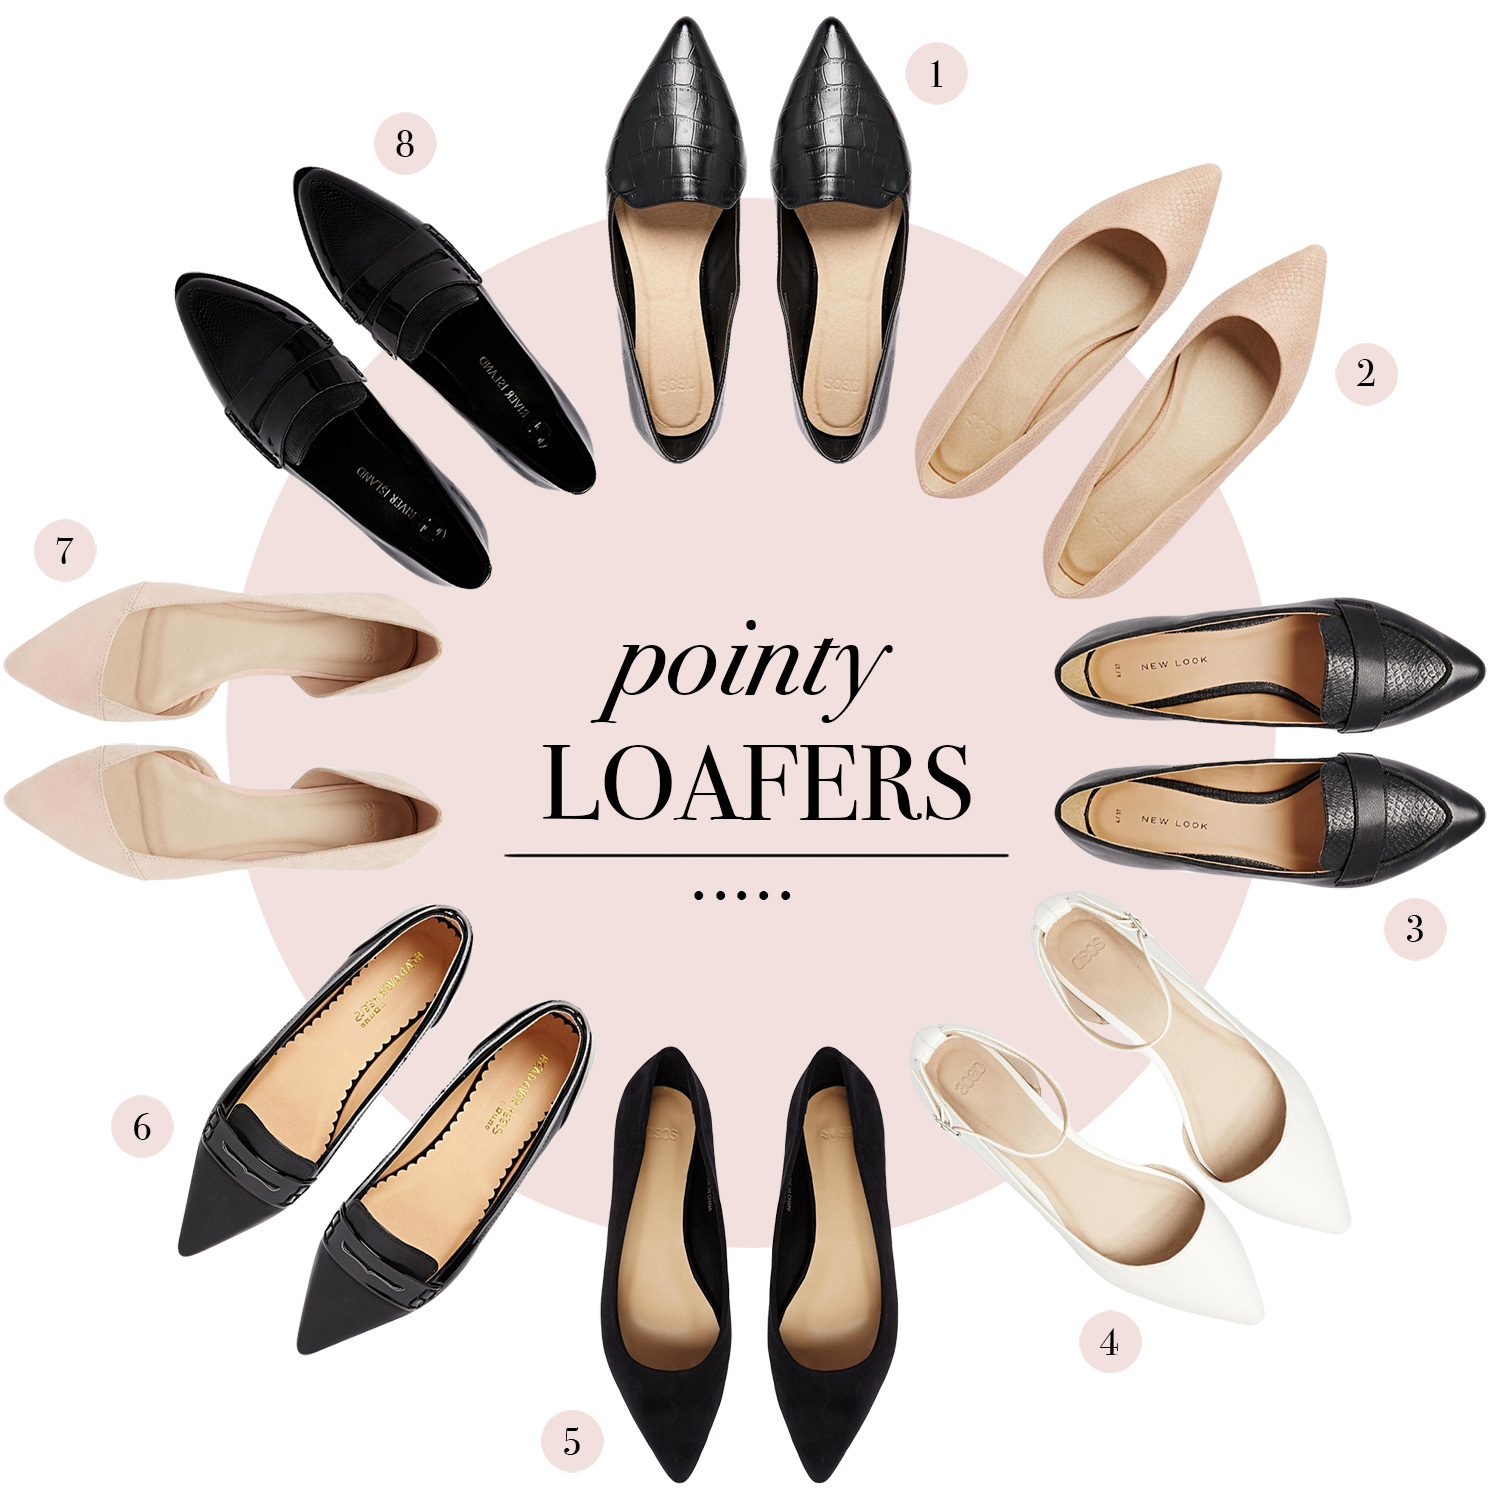 pointy-loafers@2x